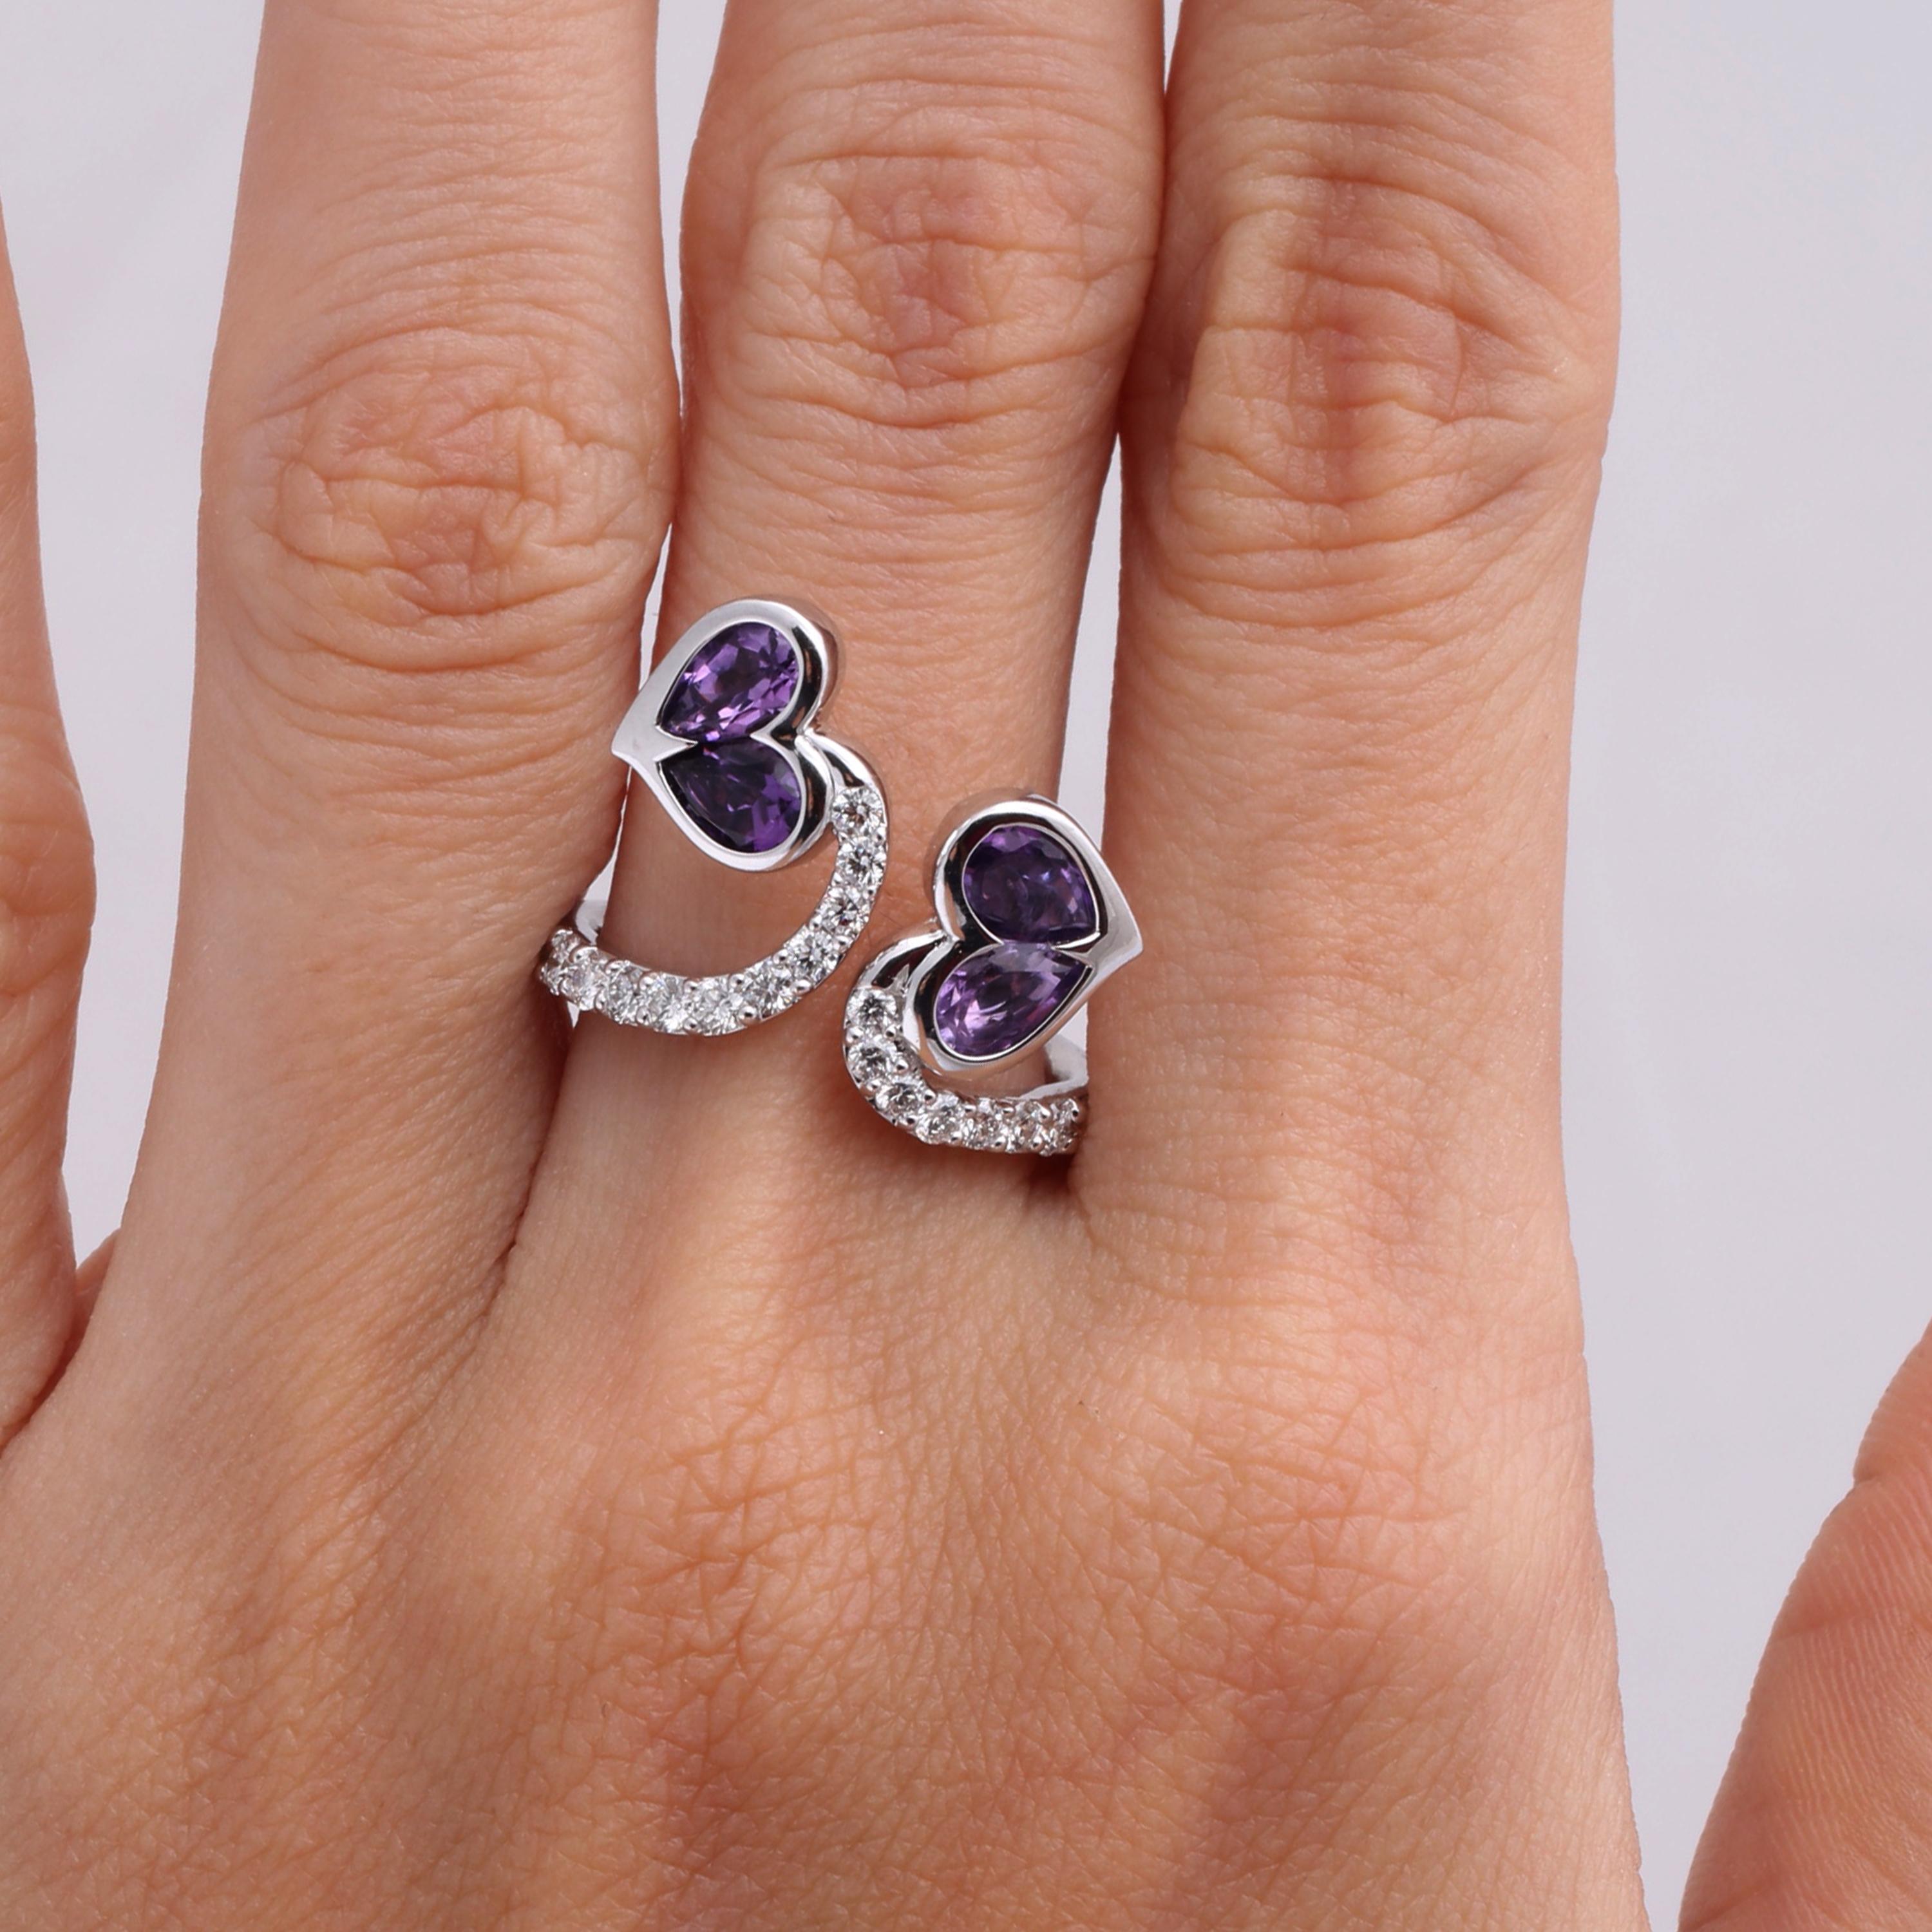 Gross Weight: 5.78 Grams
Diamond Weight: 0.52 cts
Amethyst Weight: 1.25 cts
Ring Size: US 6.5 (Resizing Can be done)
IGI Certification can be done on request

Video of the product can be shared on request.

Four perfectly matched pear shaped